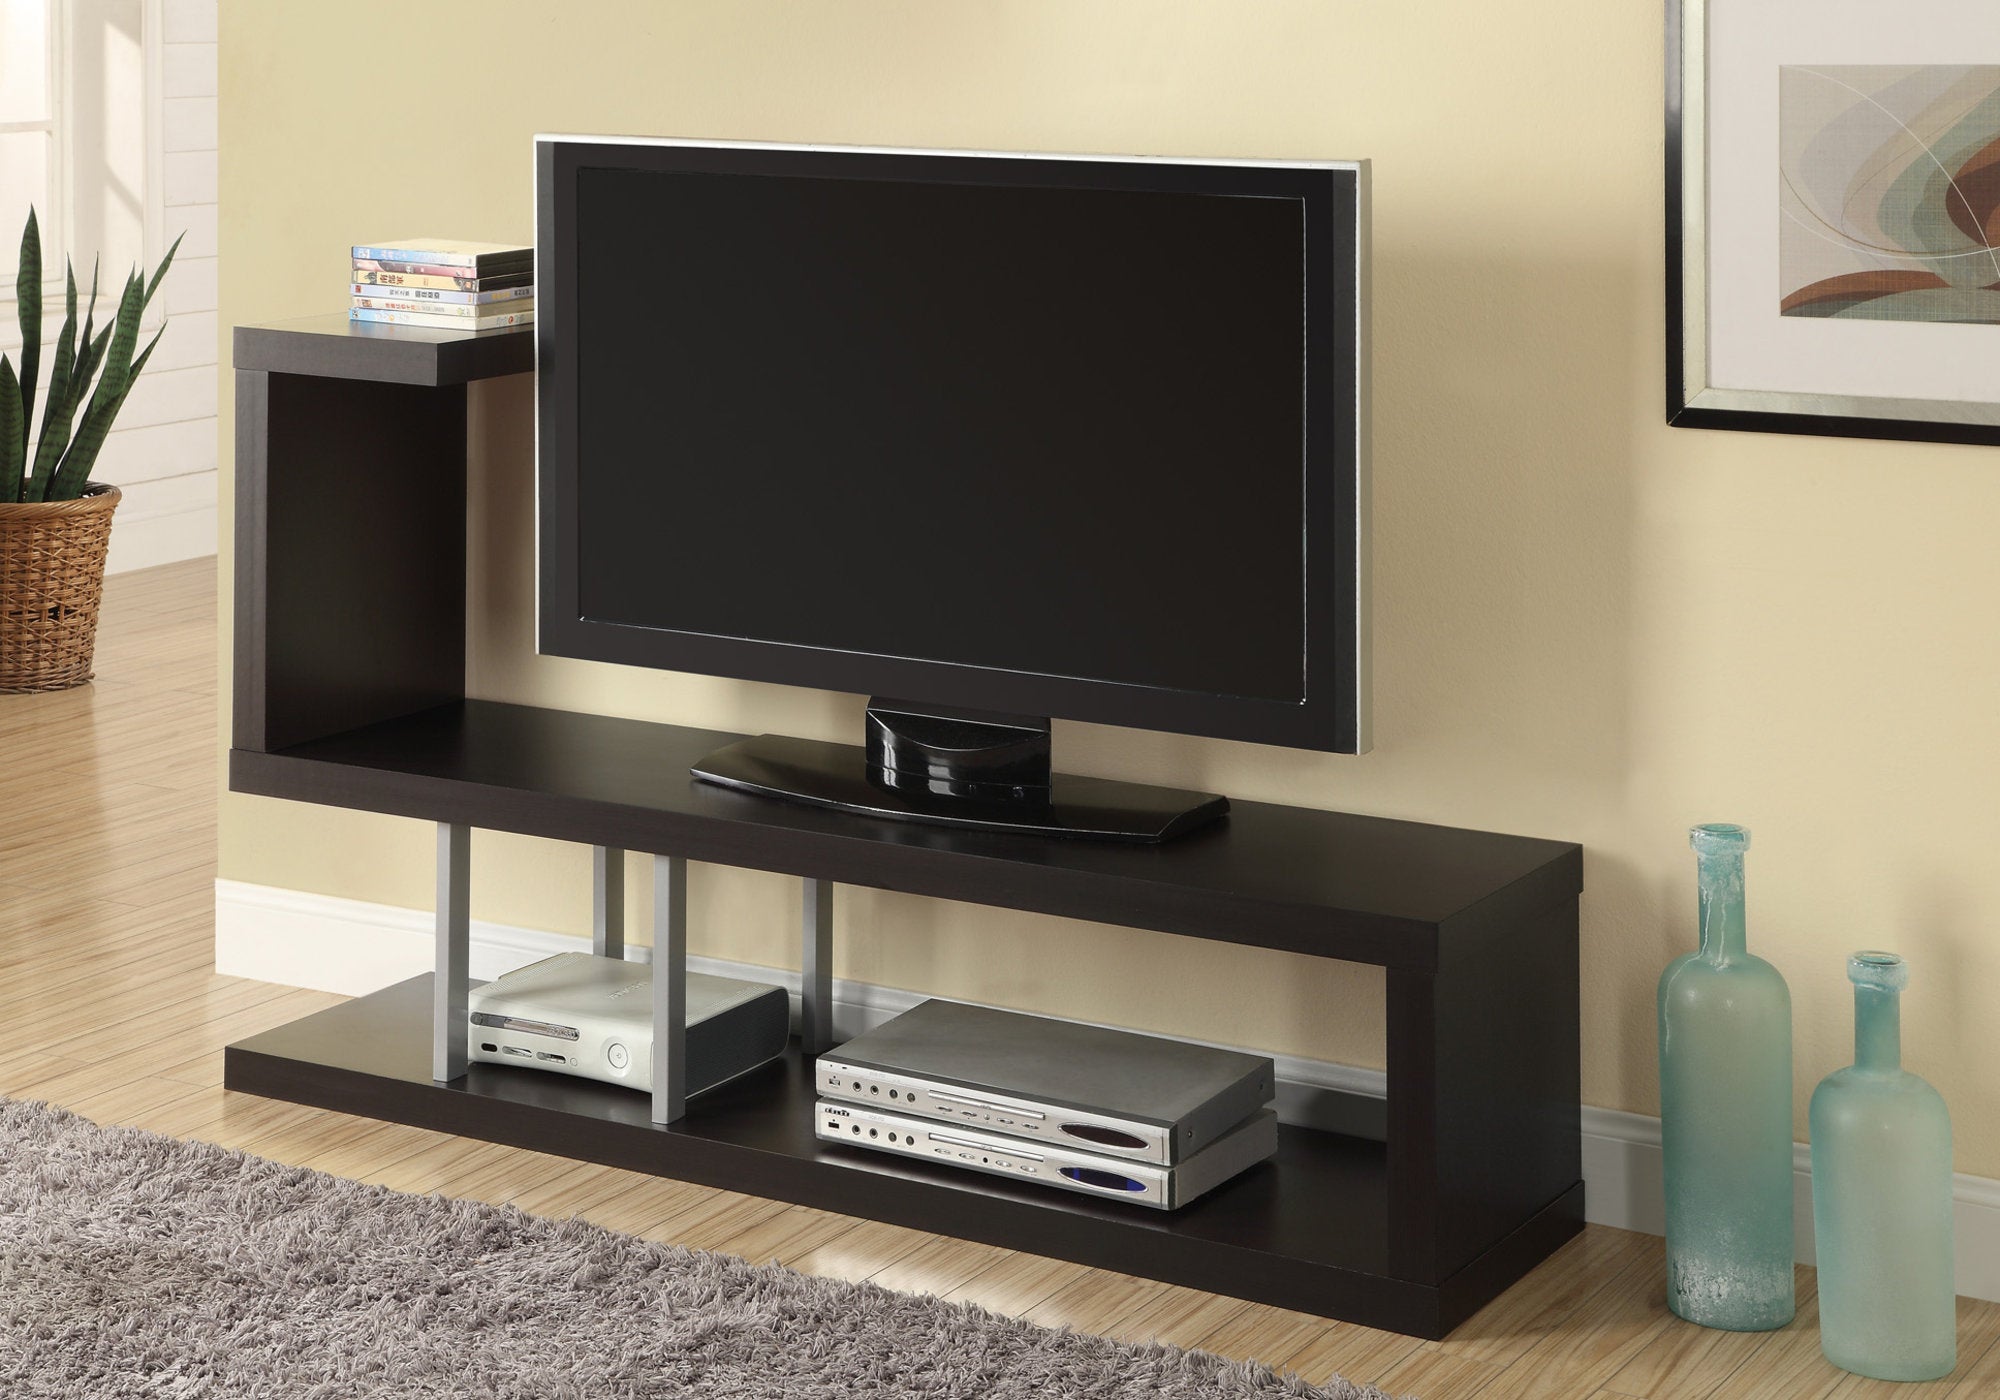 35.25" Cappuccino Particle Board Hollow Core And Silver Metal TV Stand